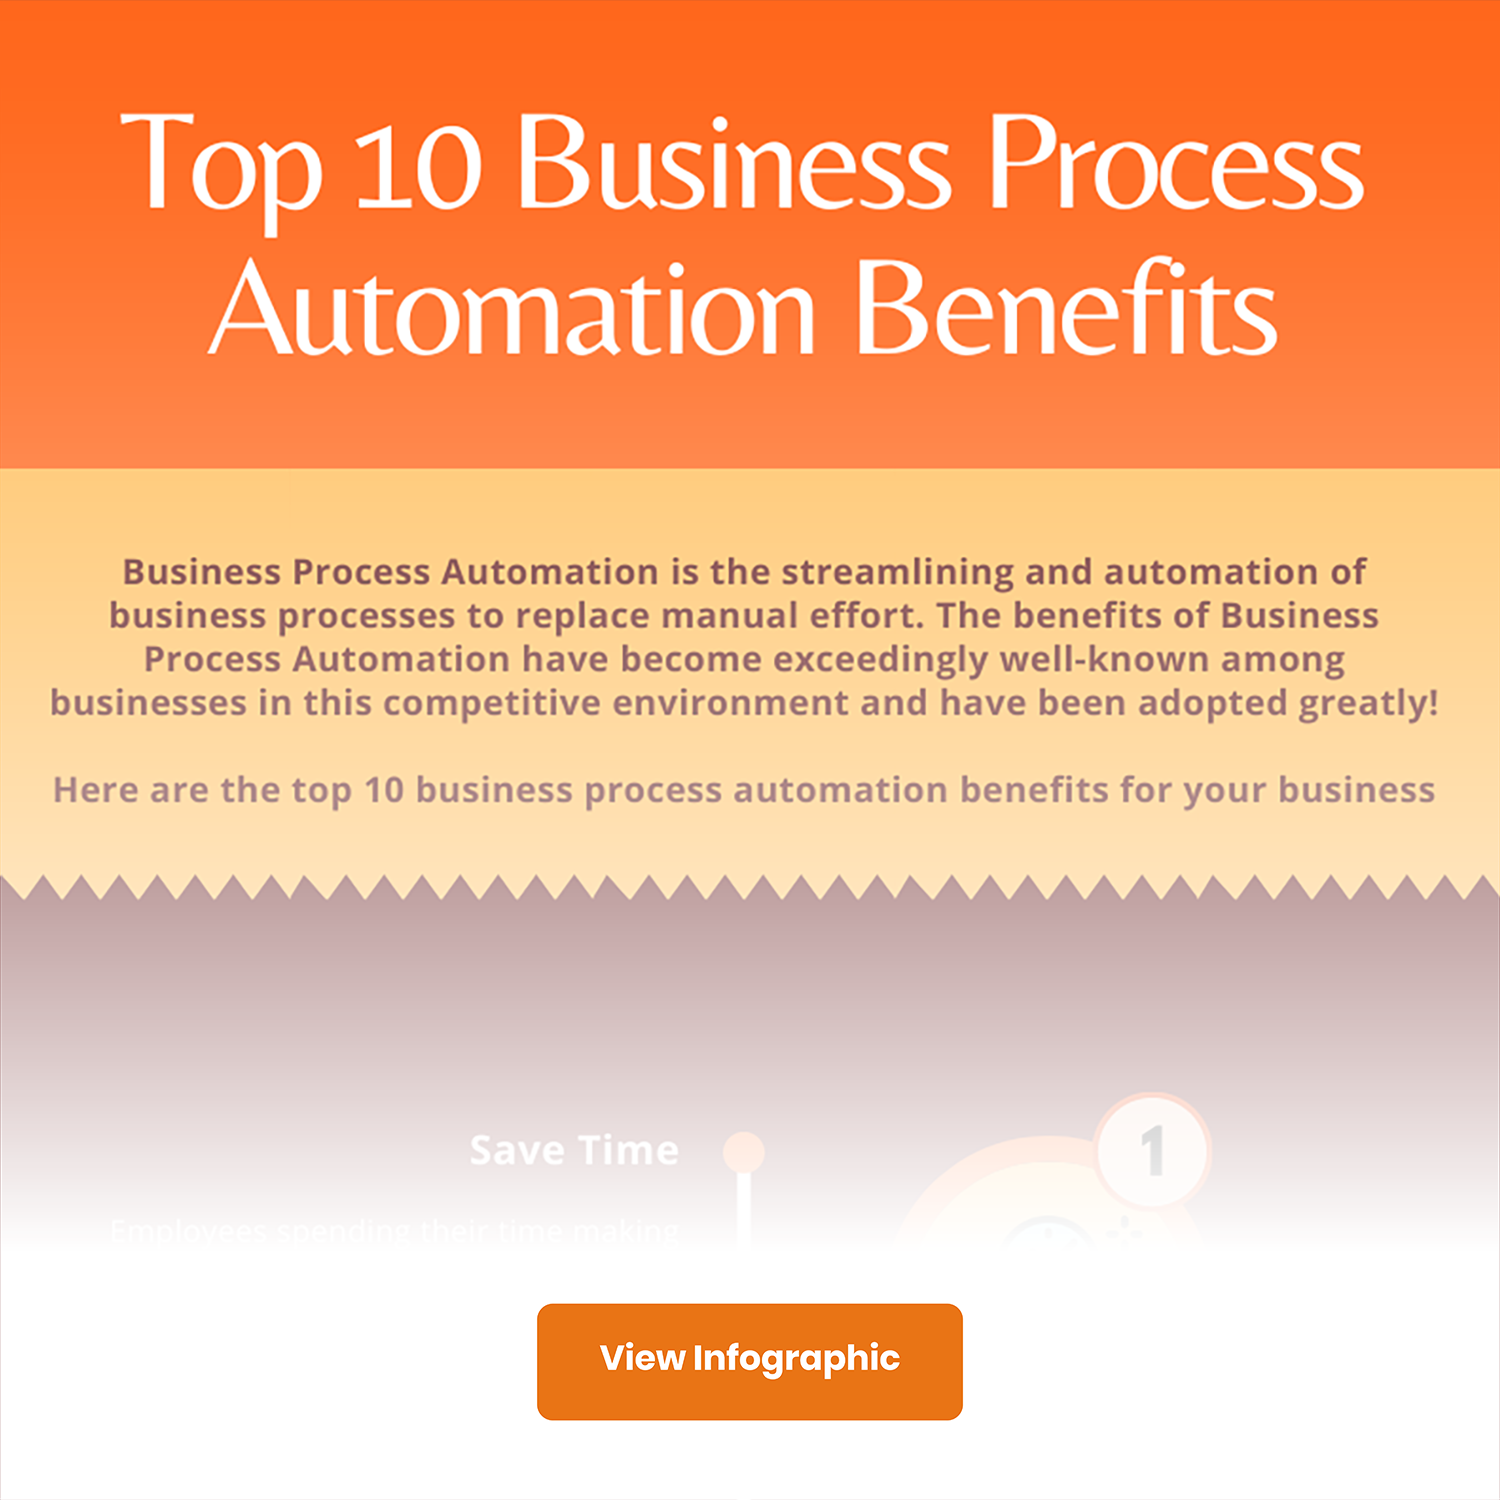 Top 10 Business Process Automation Benefits-Infographic